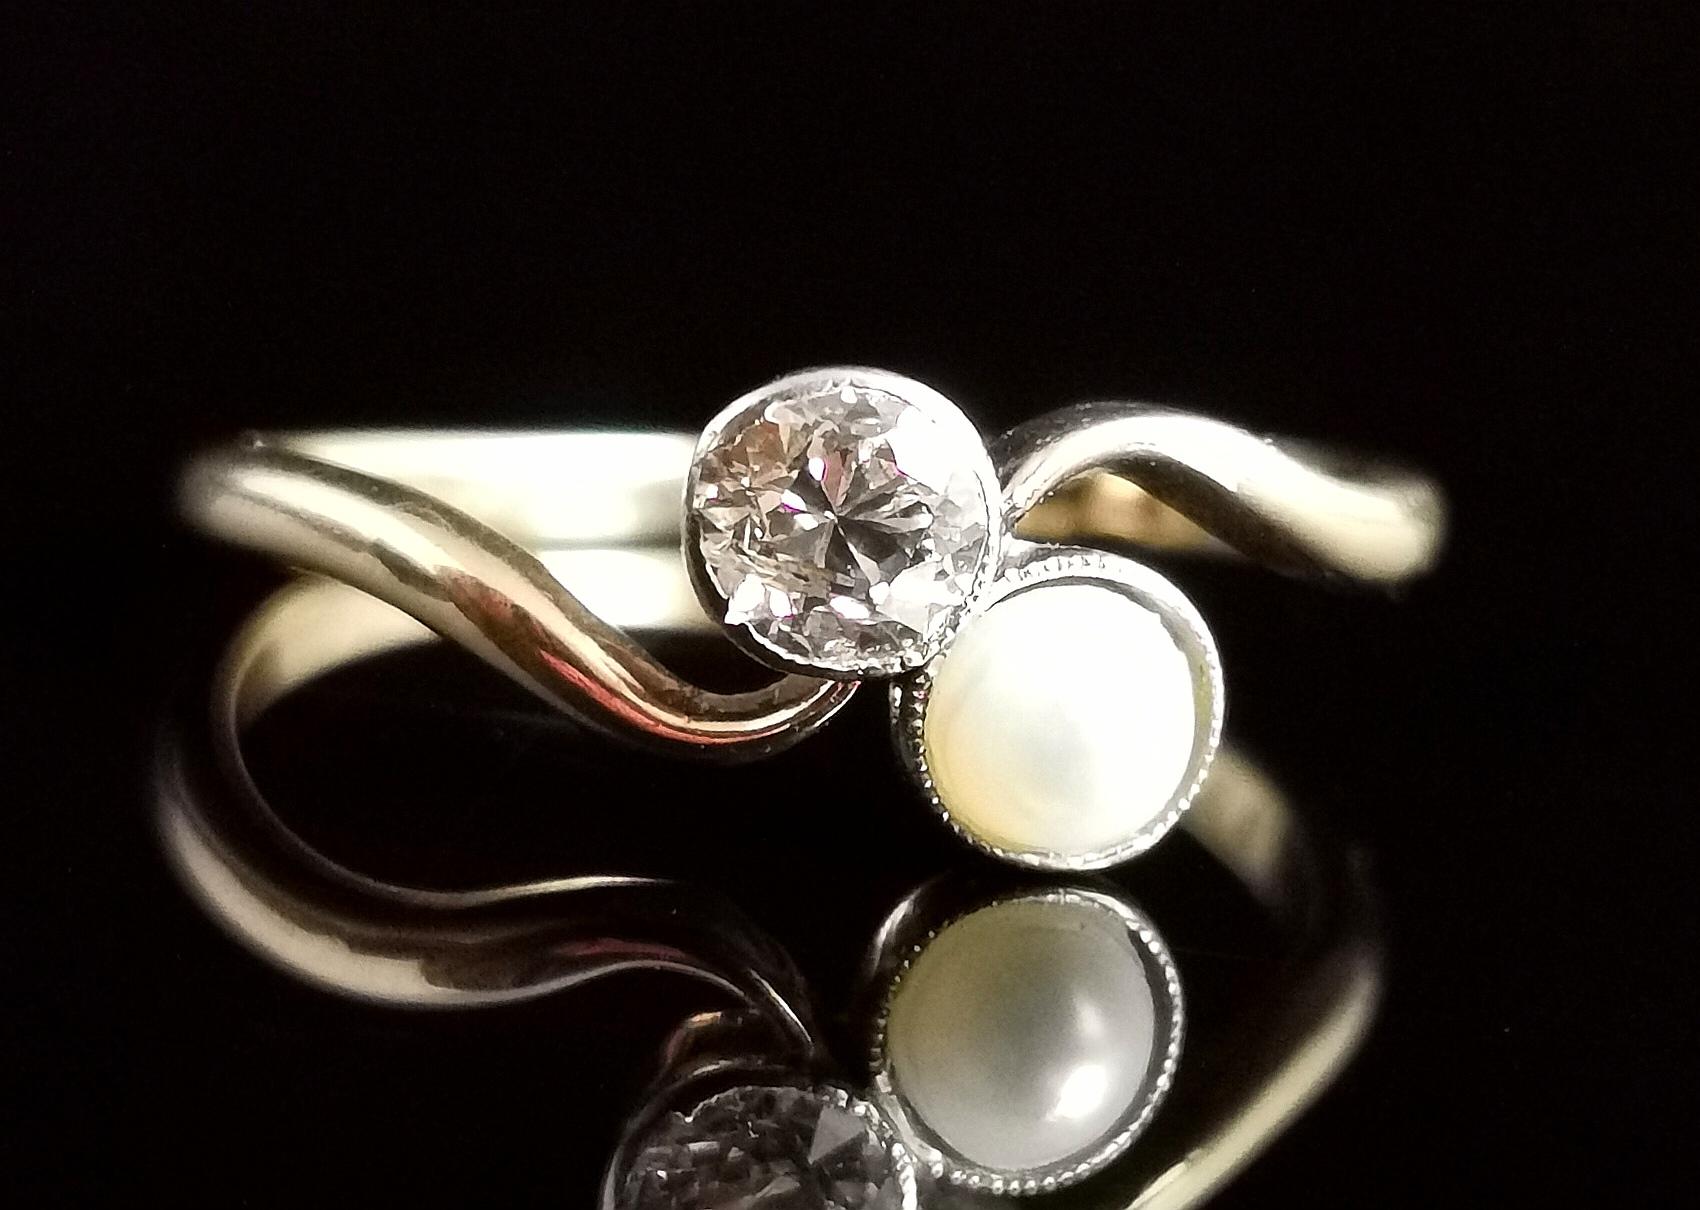 A beautiful antique 18kt gold, Diamond and pearl Crossover ring.

Also affectionately known as the Toi Et Moi which translates to you and me, the joining together of two entities, usually created with two different stones such as this one with its